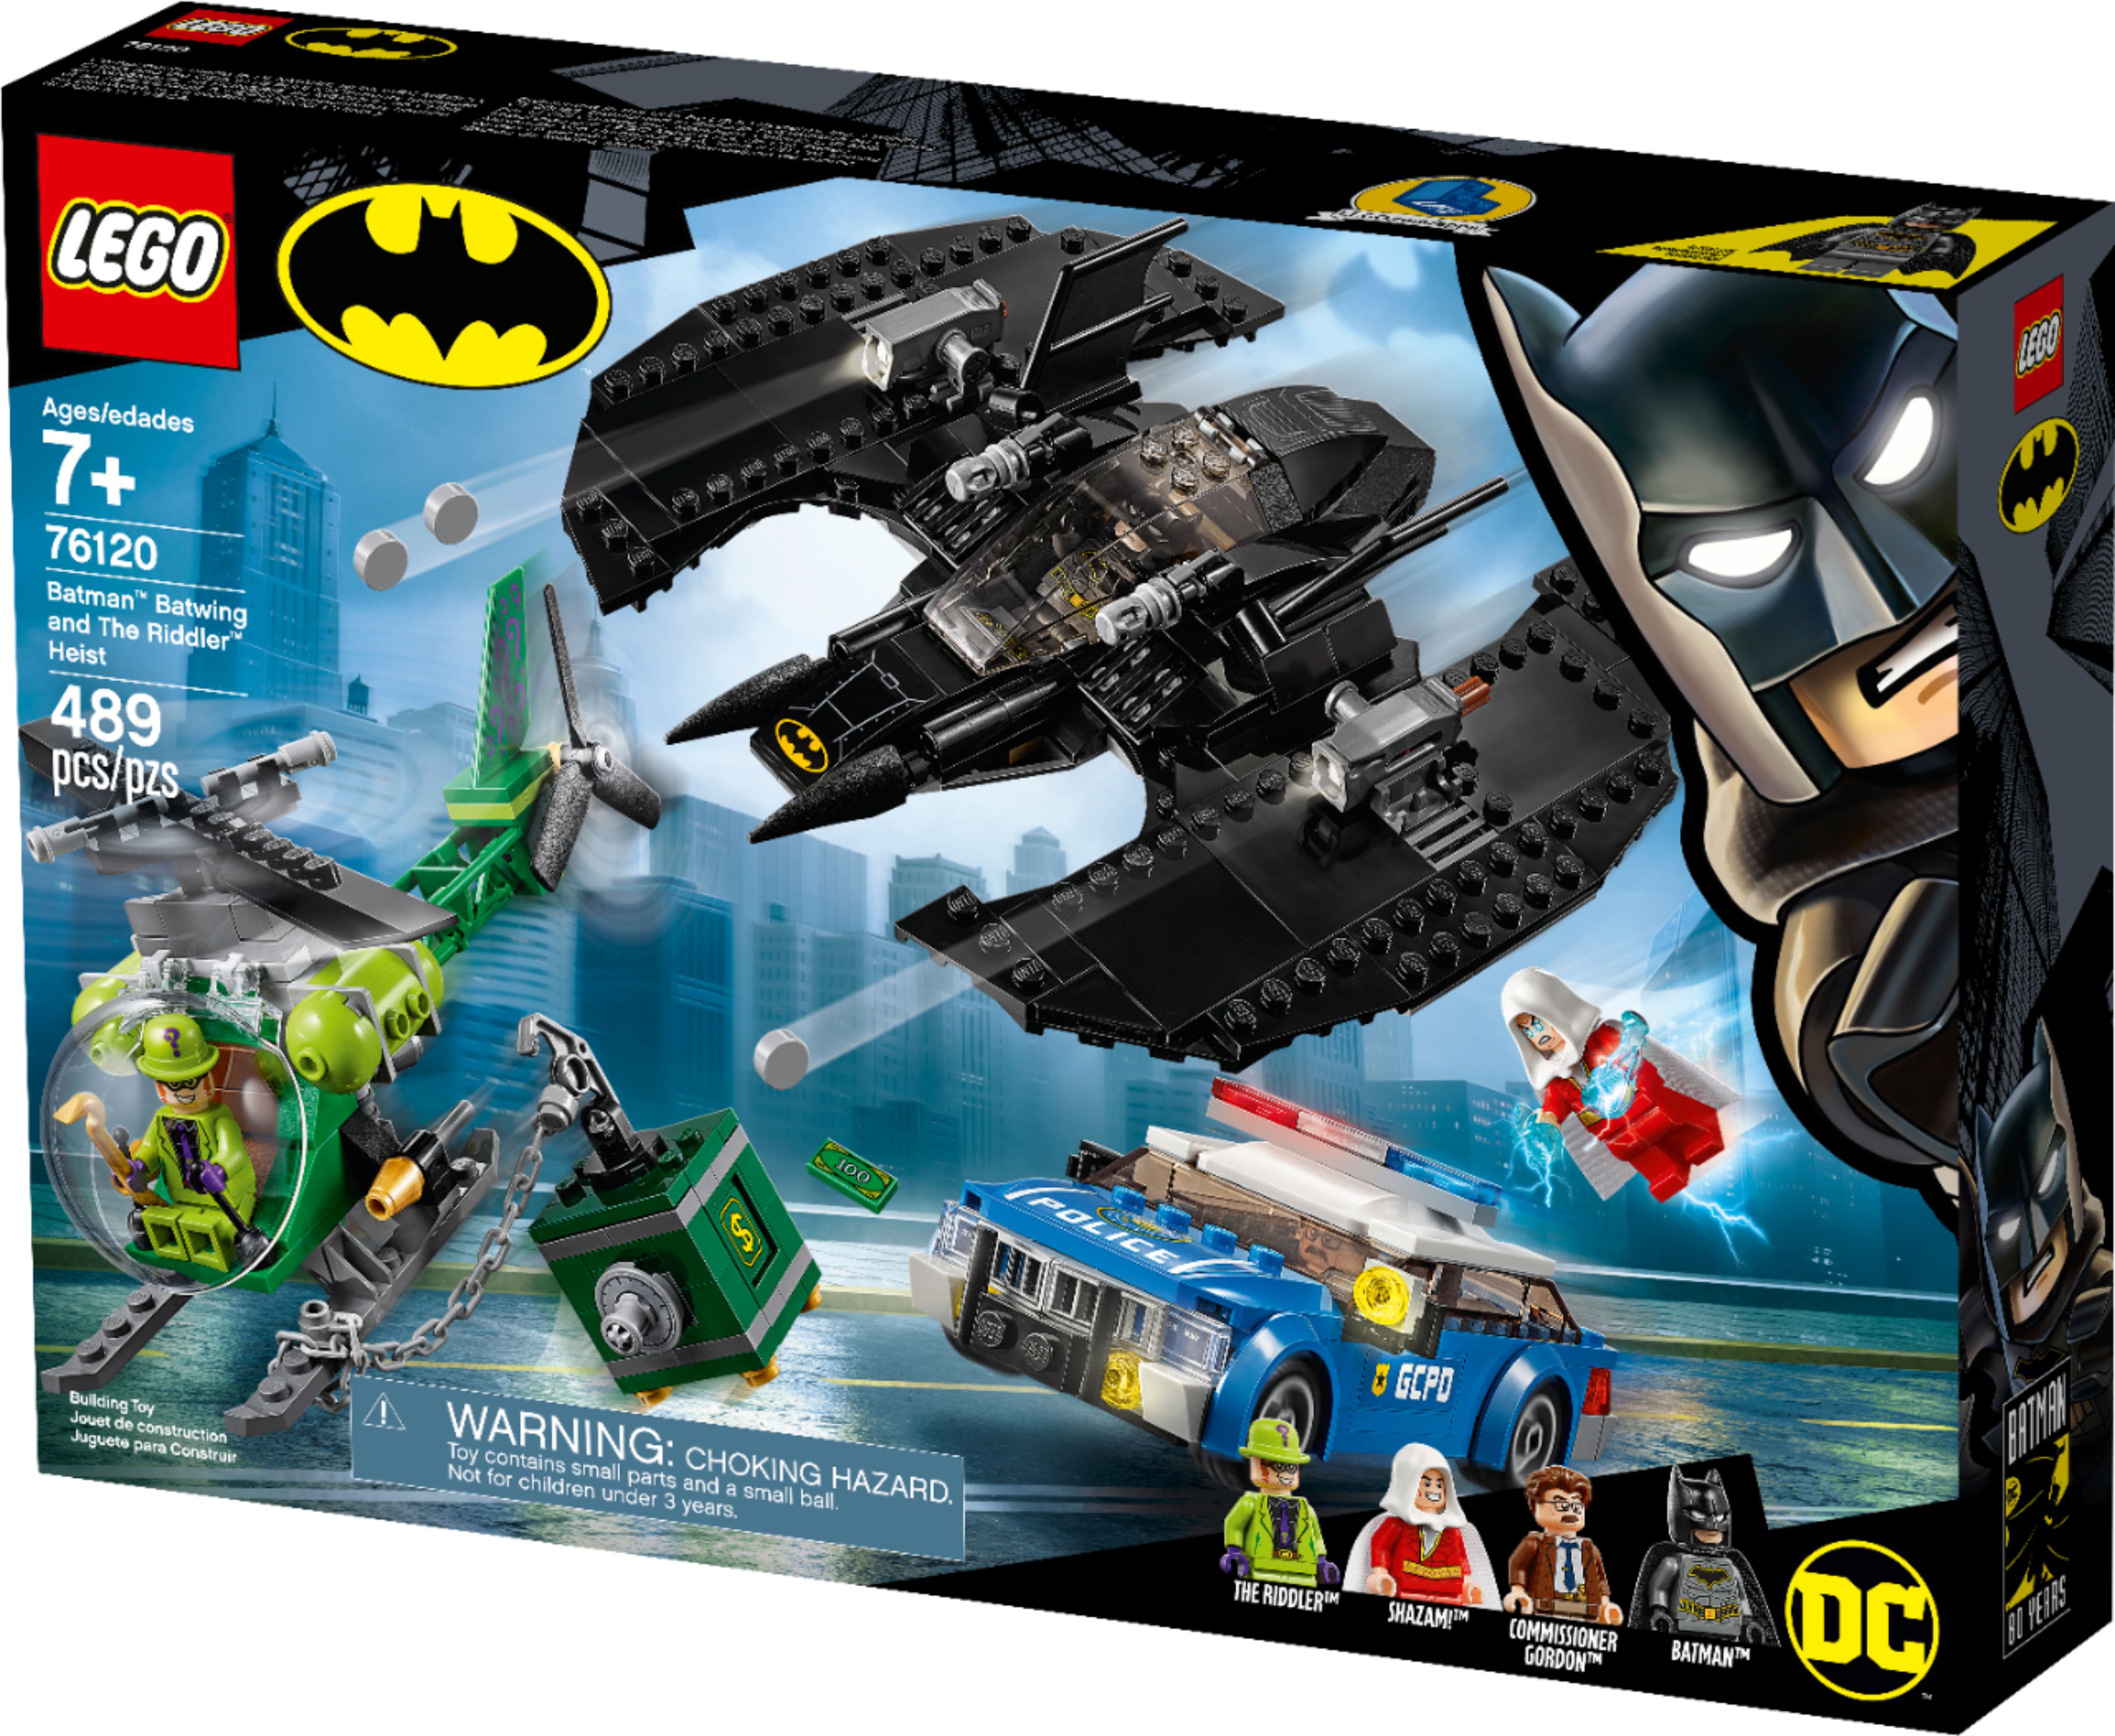 LEGO DC Super Heroes Batman Batwing and The Riddler Heist 76120 Multi